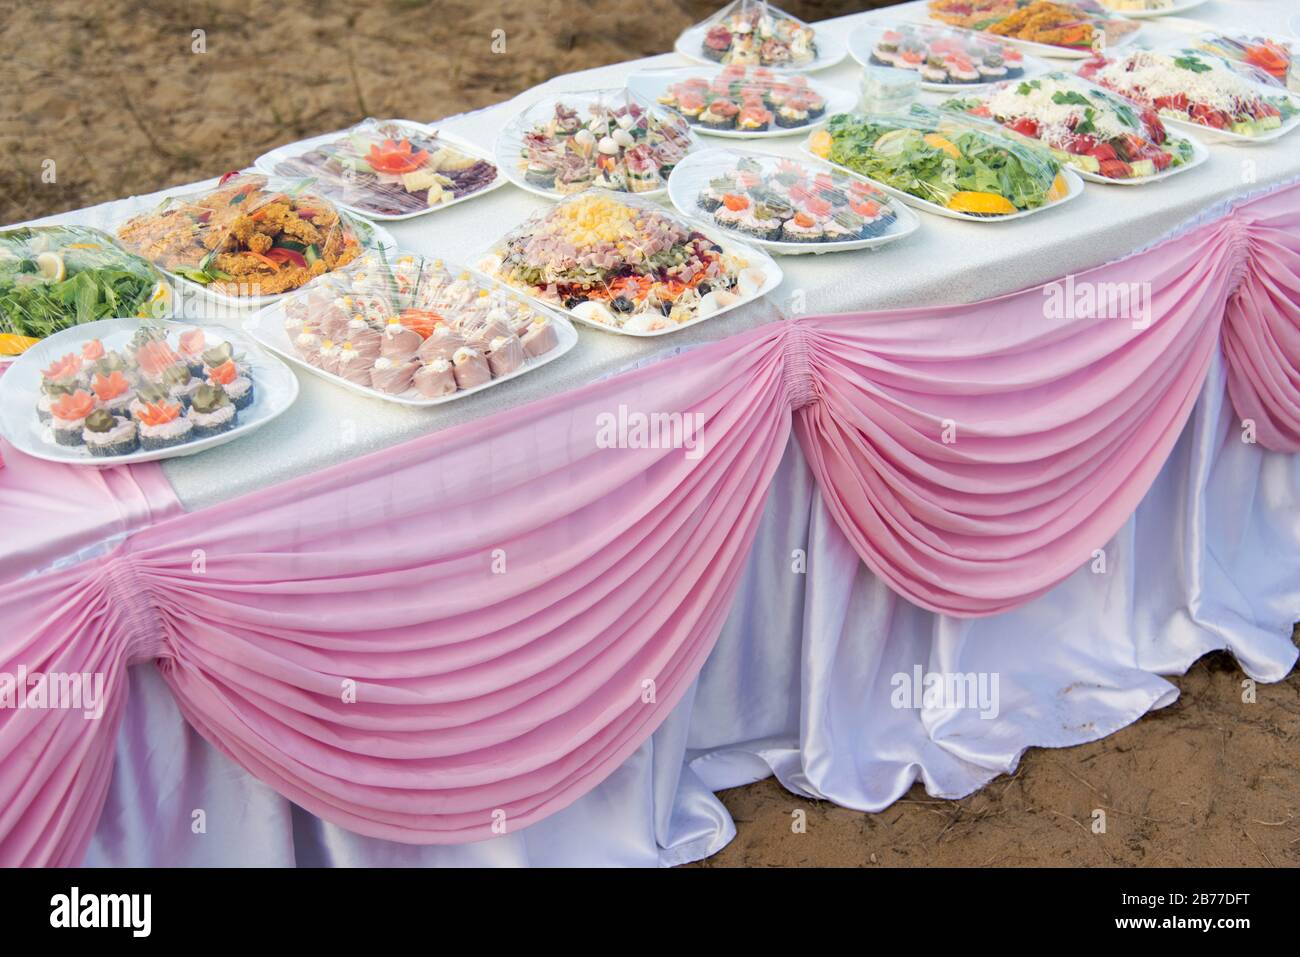 Buffet catering for a wedding party on the beach on a white table